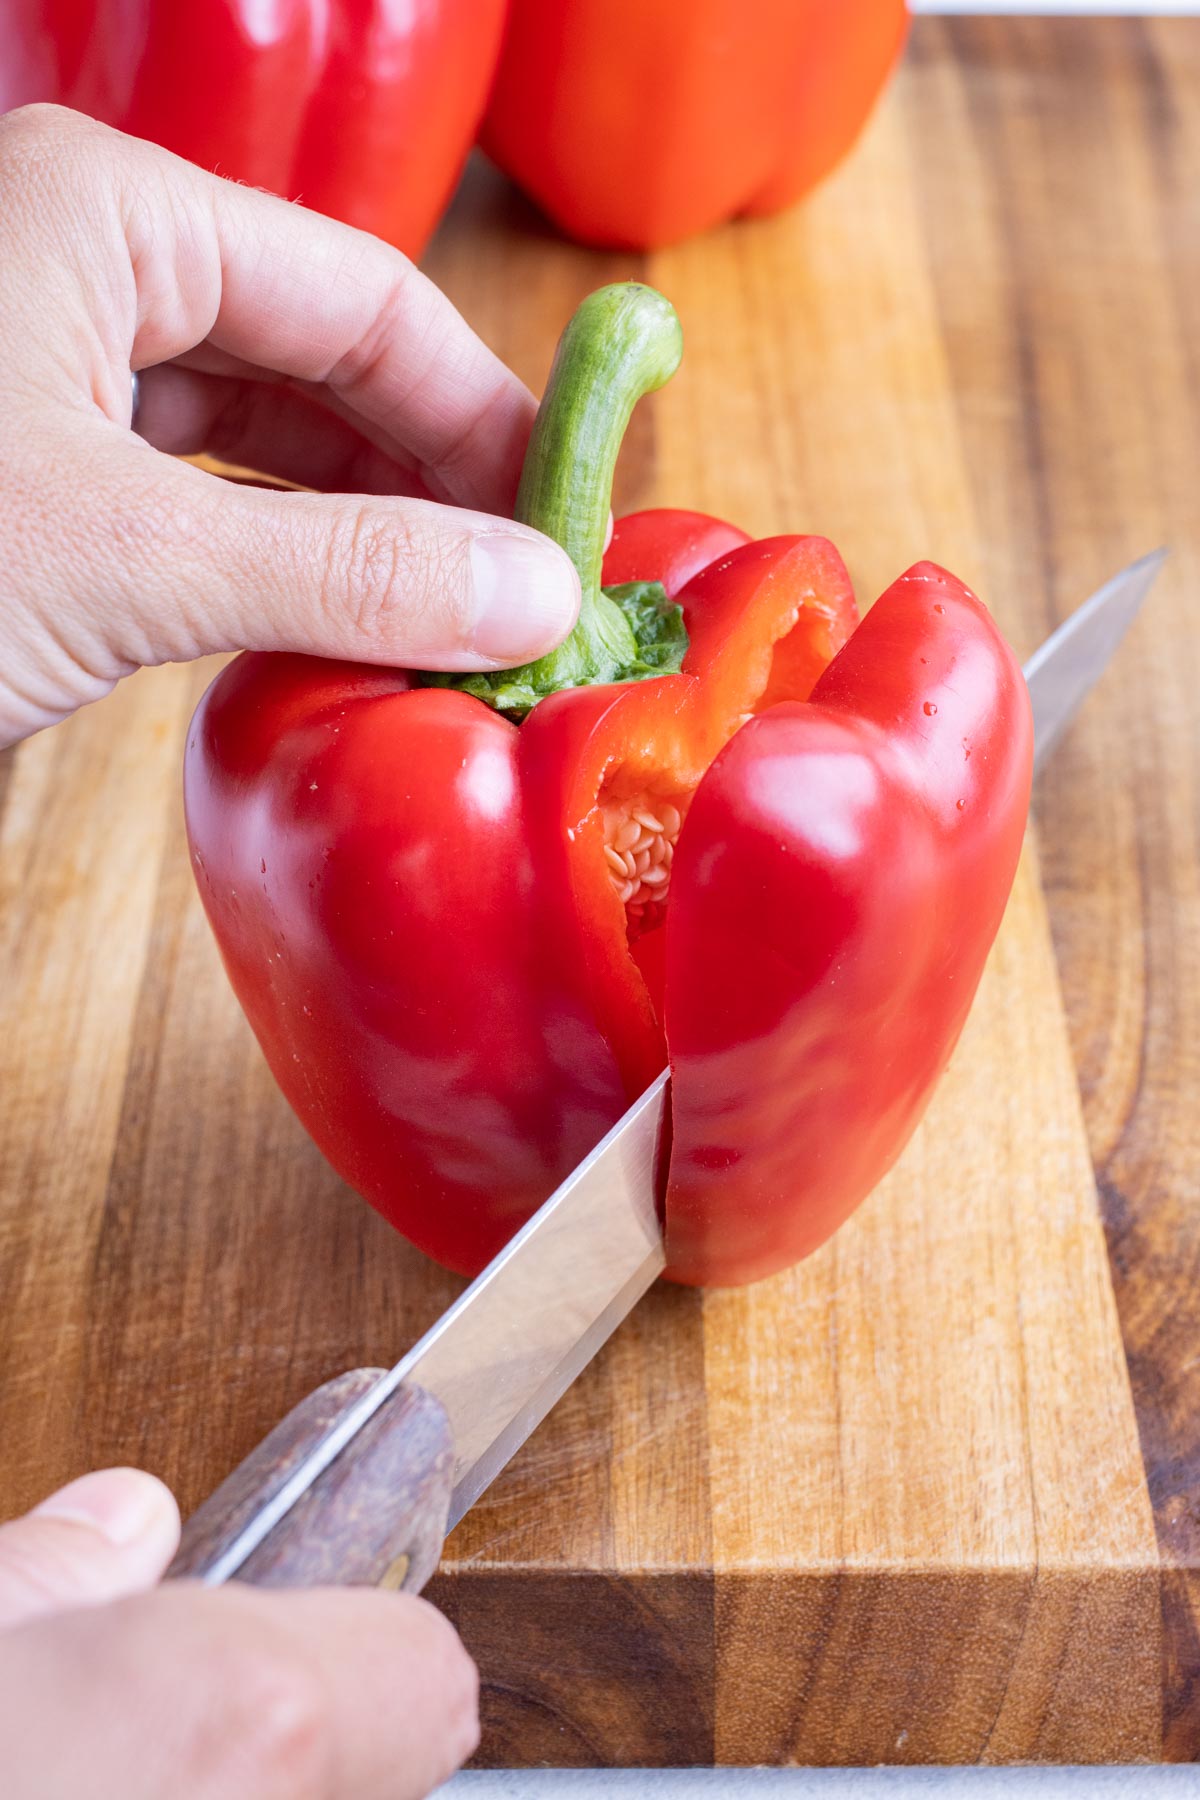 A shark knife slices the outside of a bell pepper.